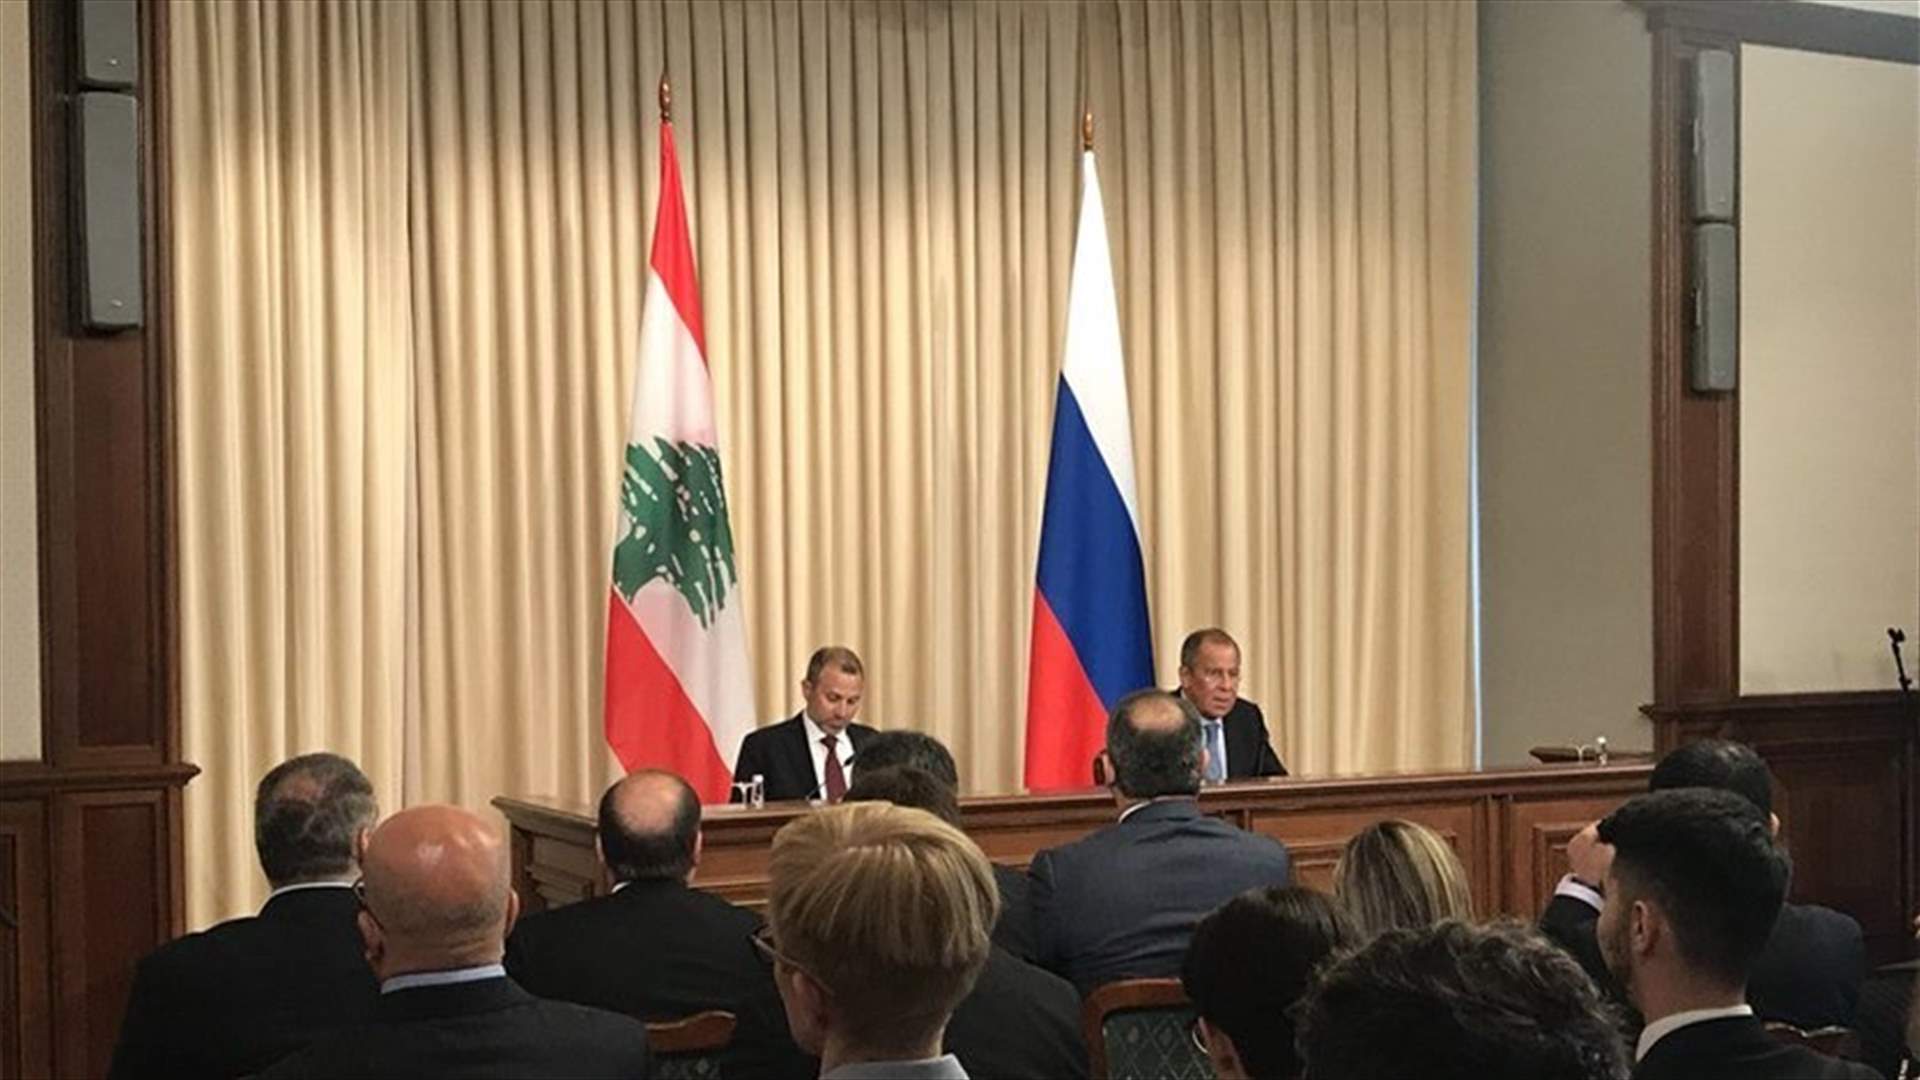 Lebanese delegation sources to LBCI: Lavrov resentful over behavior of UN employees regarding issue of refugees